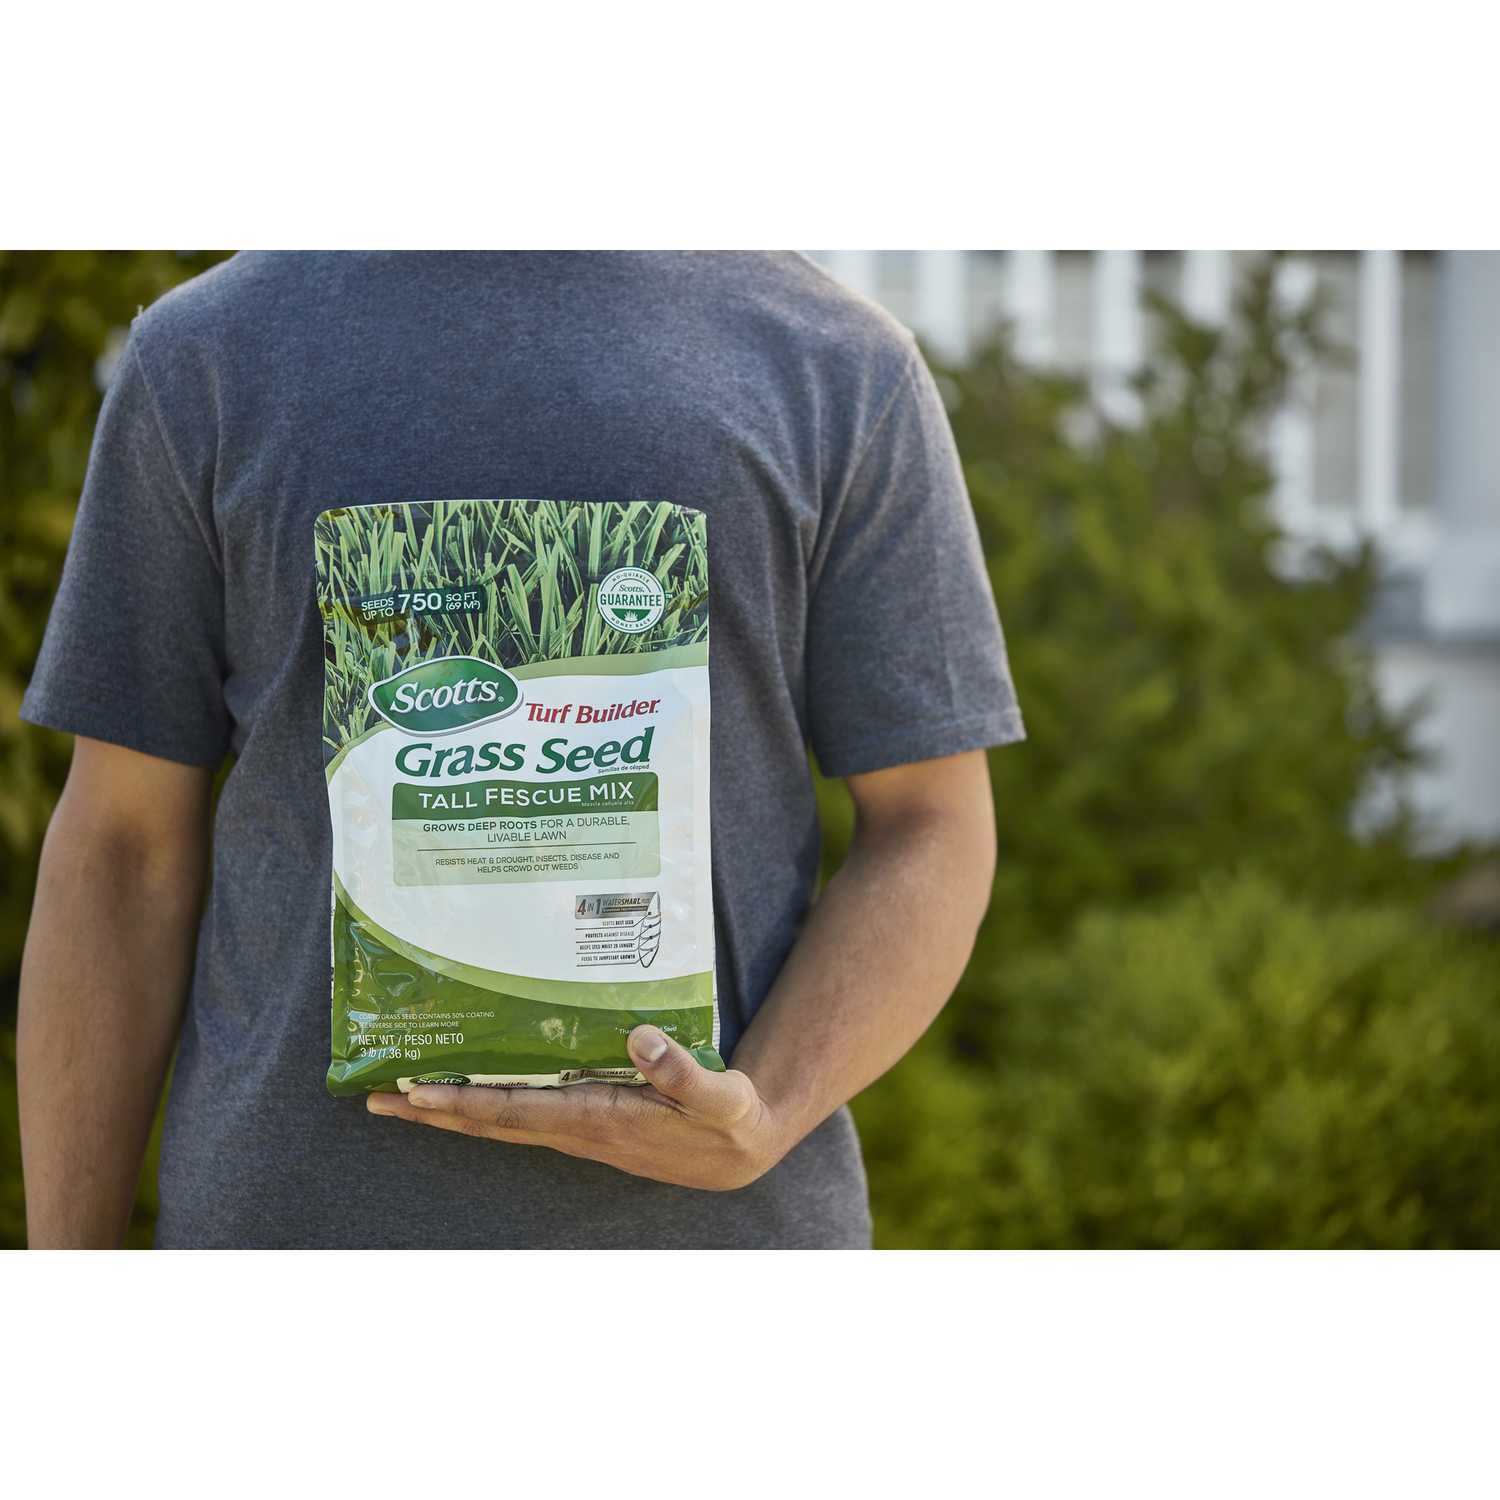 Scotts Turf Builder Tall Fescue Grass Seed 3 lb. - Ace Hardware